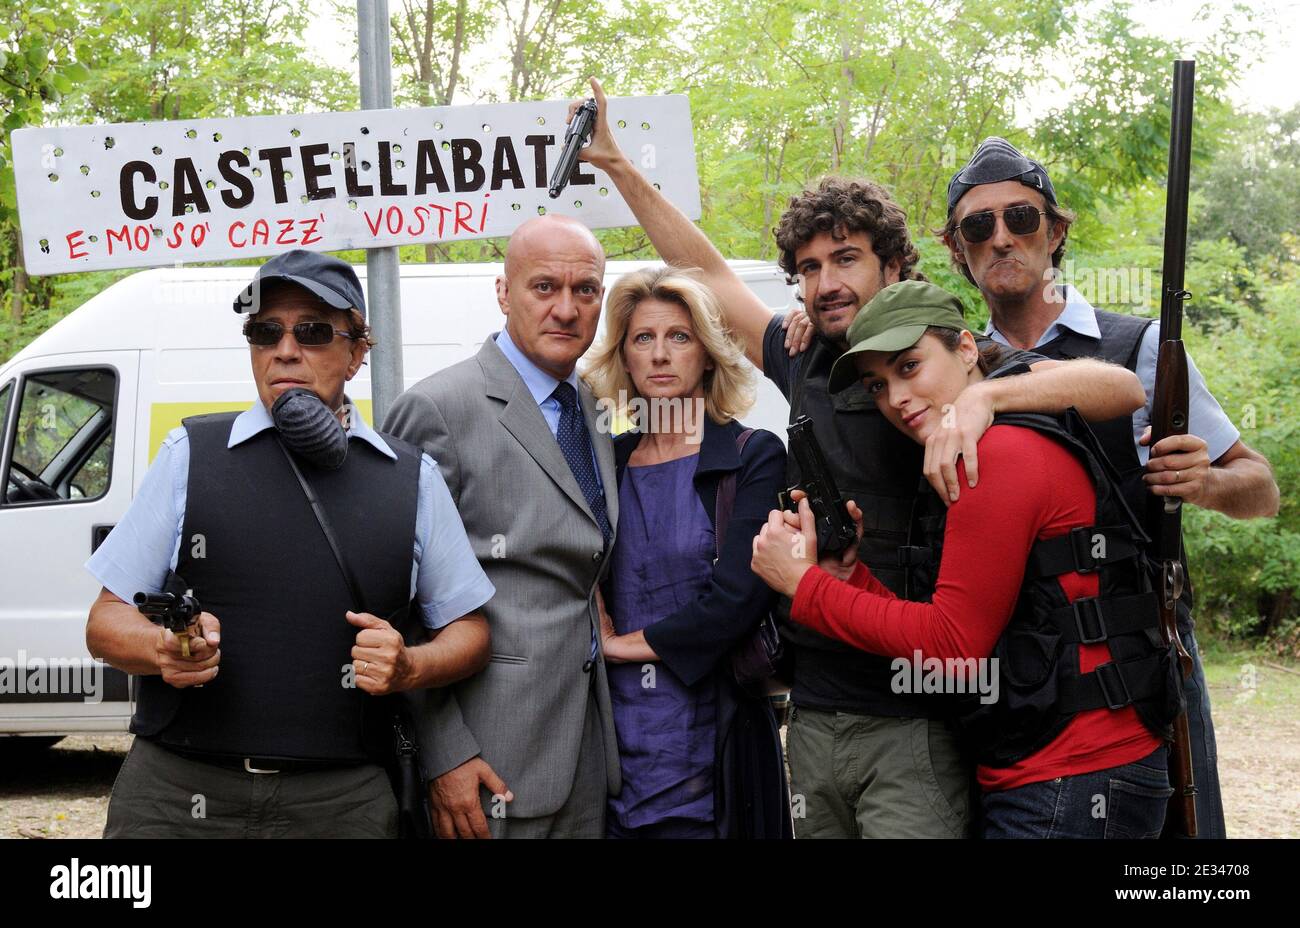 Cast members (L-R) Giacomo Rizzo, Claudio Bisio, Angela Finocchiaro, Alessandro Siani, Valentina Lodovini and Nando Paone on the set of Italian film 'Benvenuti al sud' (Welcome to the South) in Italy in September 2009. This film is an Italian remake of French film 'Bienvenue chez les ch'tis' (Welcome to the sticks), a comedy about regional stereotypes which had become the most successful French production in history. Photo by Eric Vandeville/ABACAPRESS.COM Stock Photo